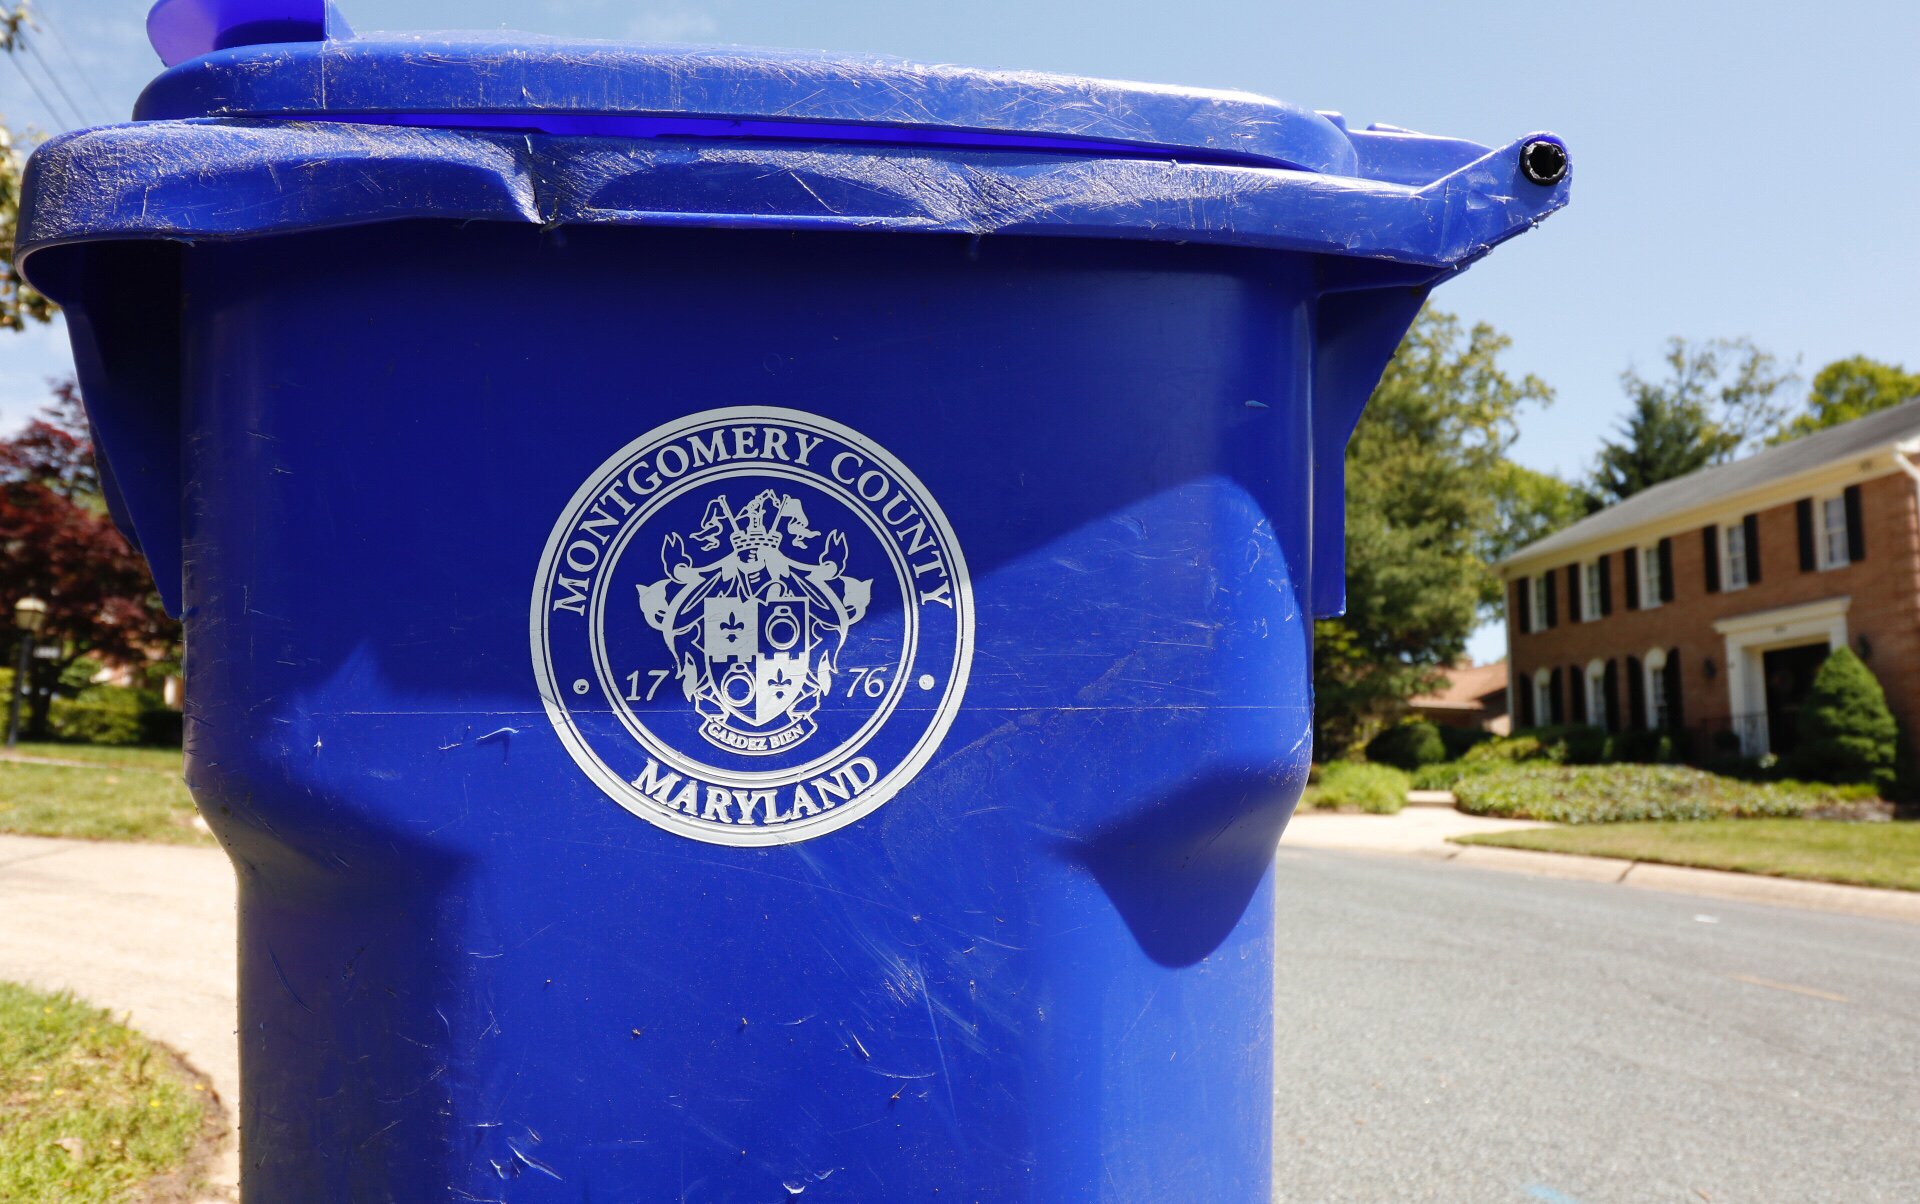 Montgomery Co. gets new help with solid waste pickup | WTOP